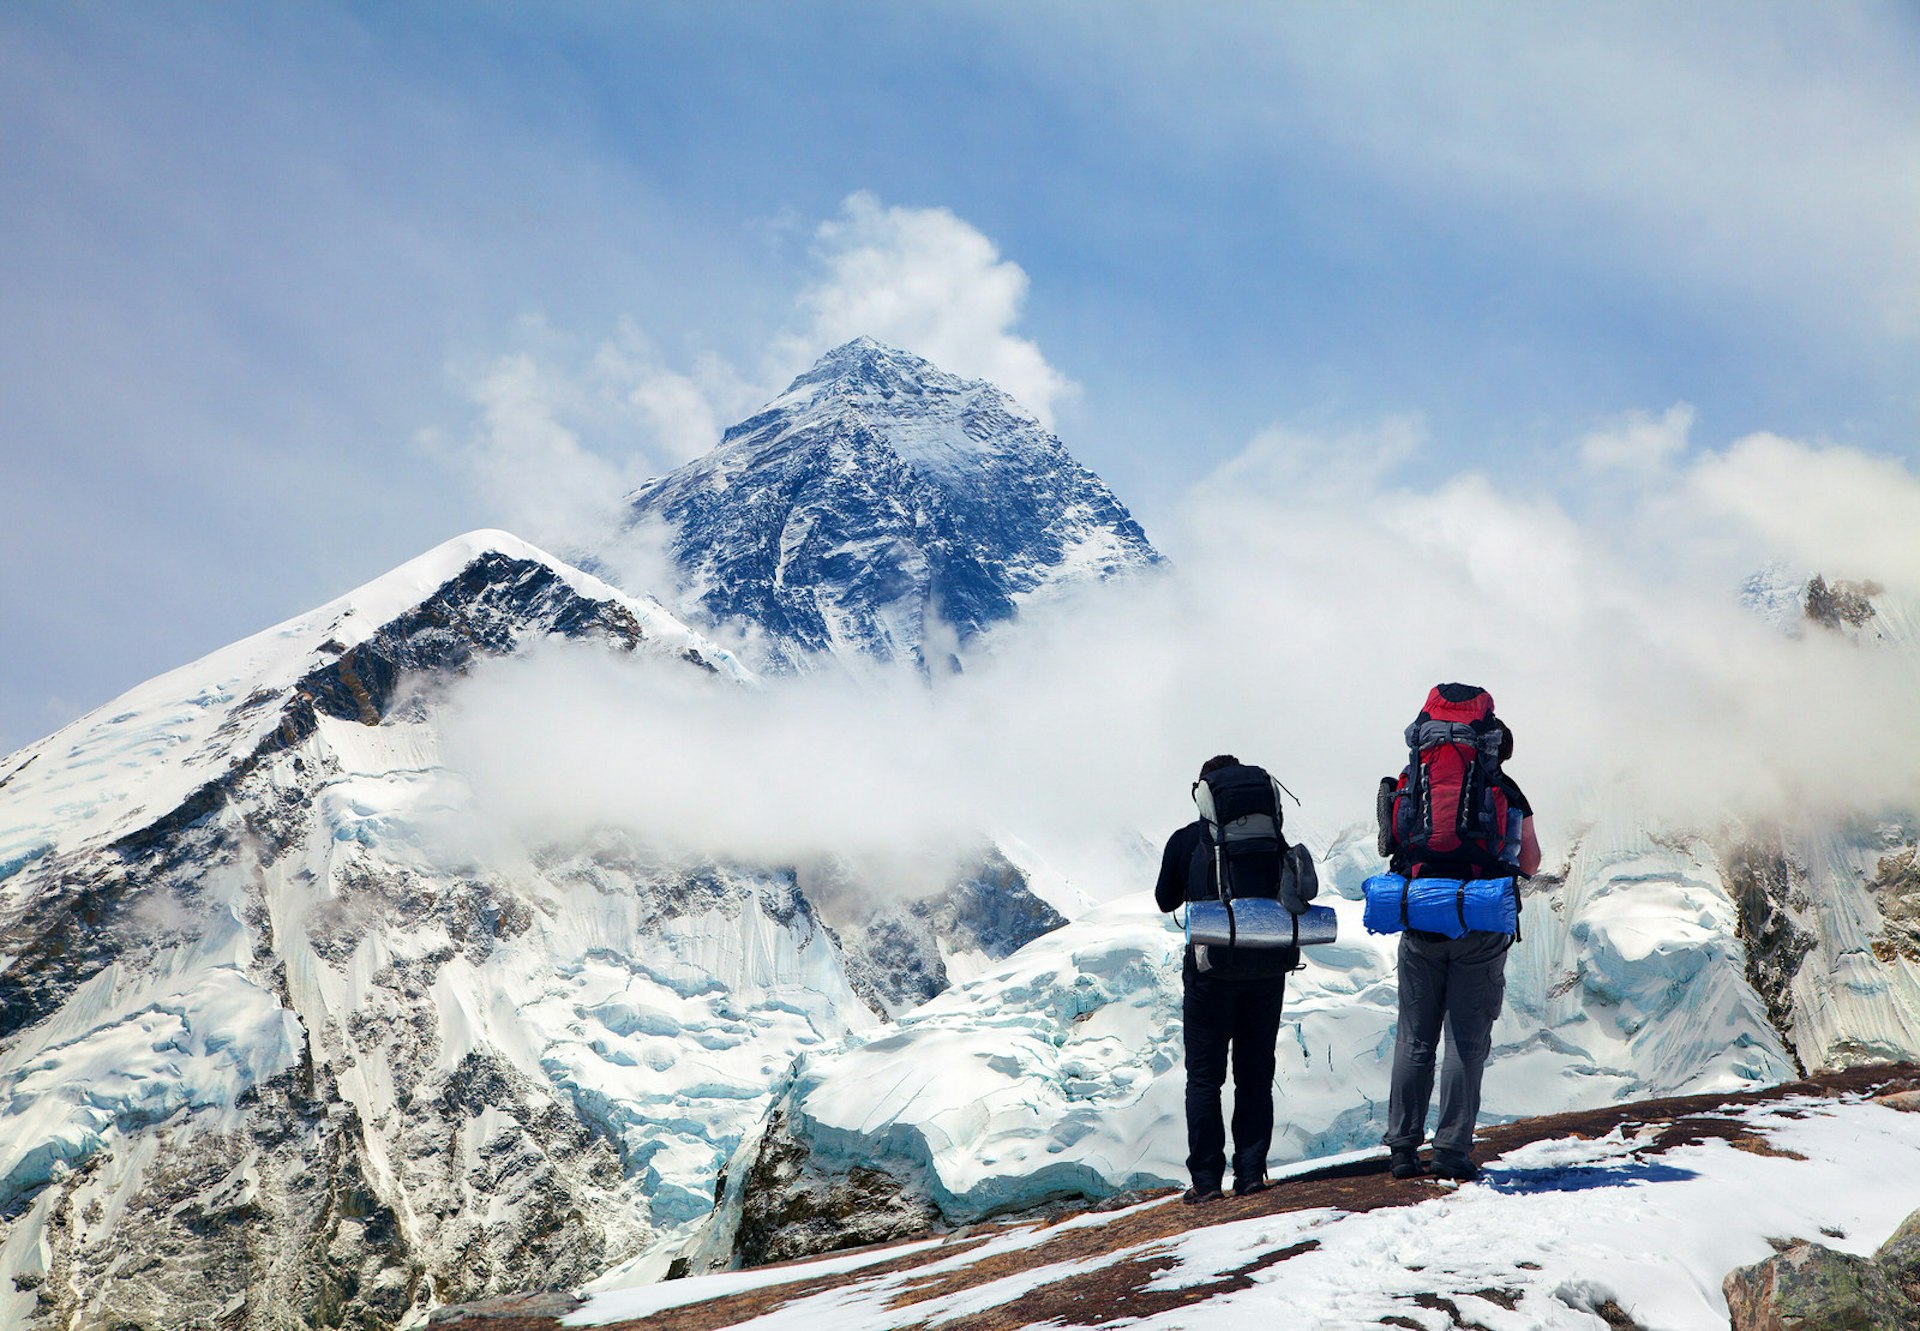 Panoramic view of Mount Everest from Kala Patthar with two tourists on the way to Everest base camp.